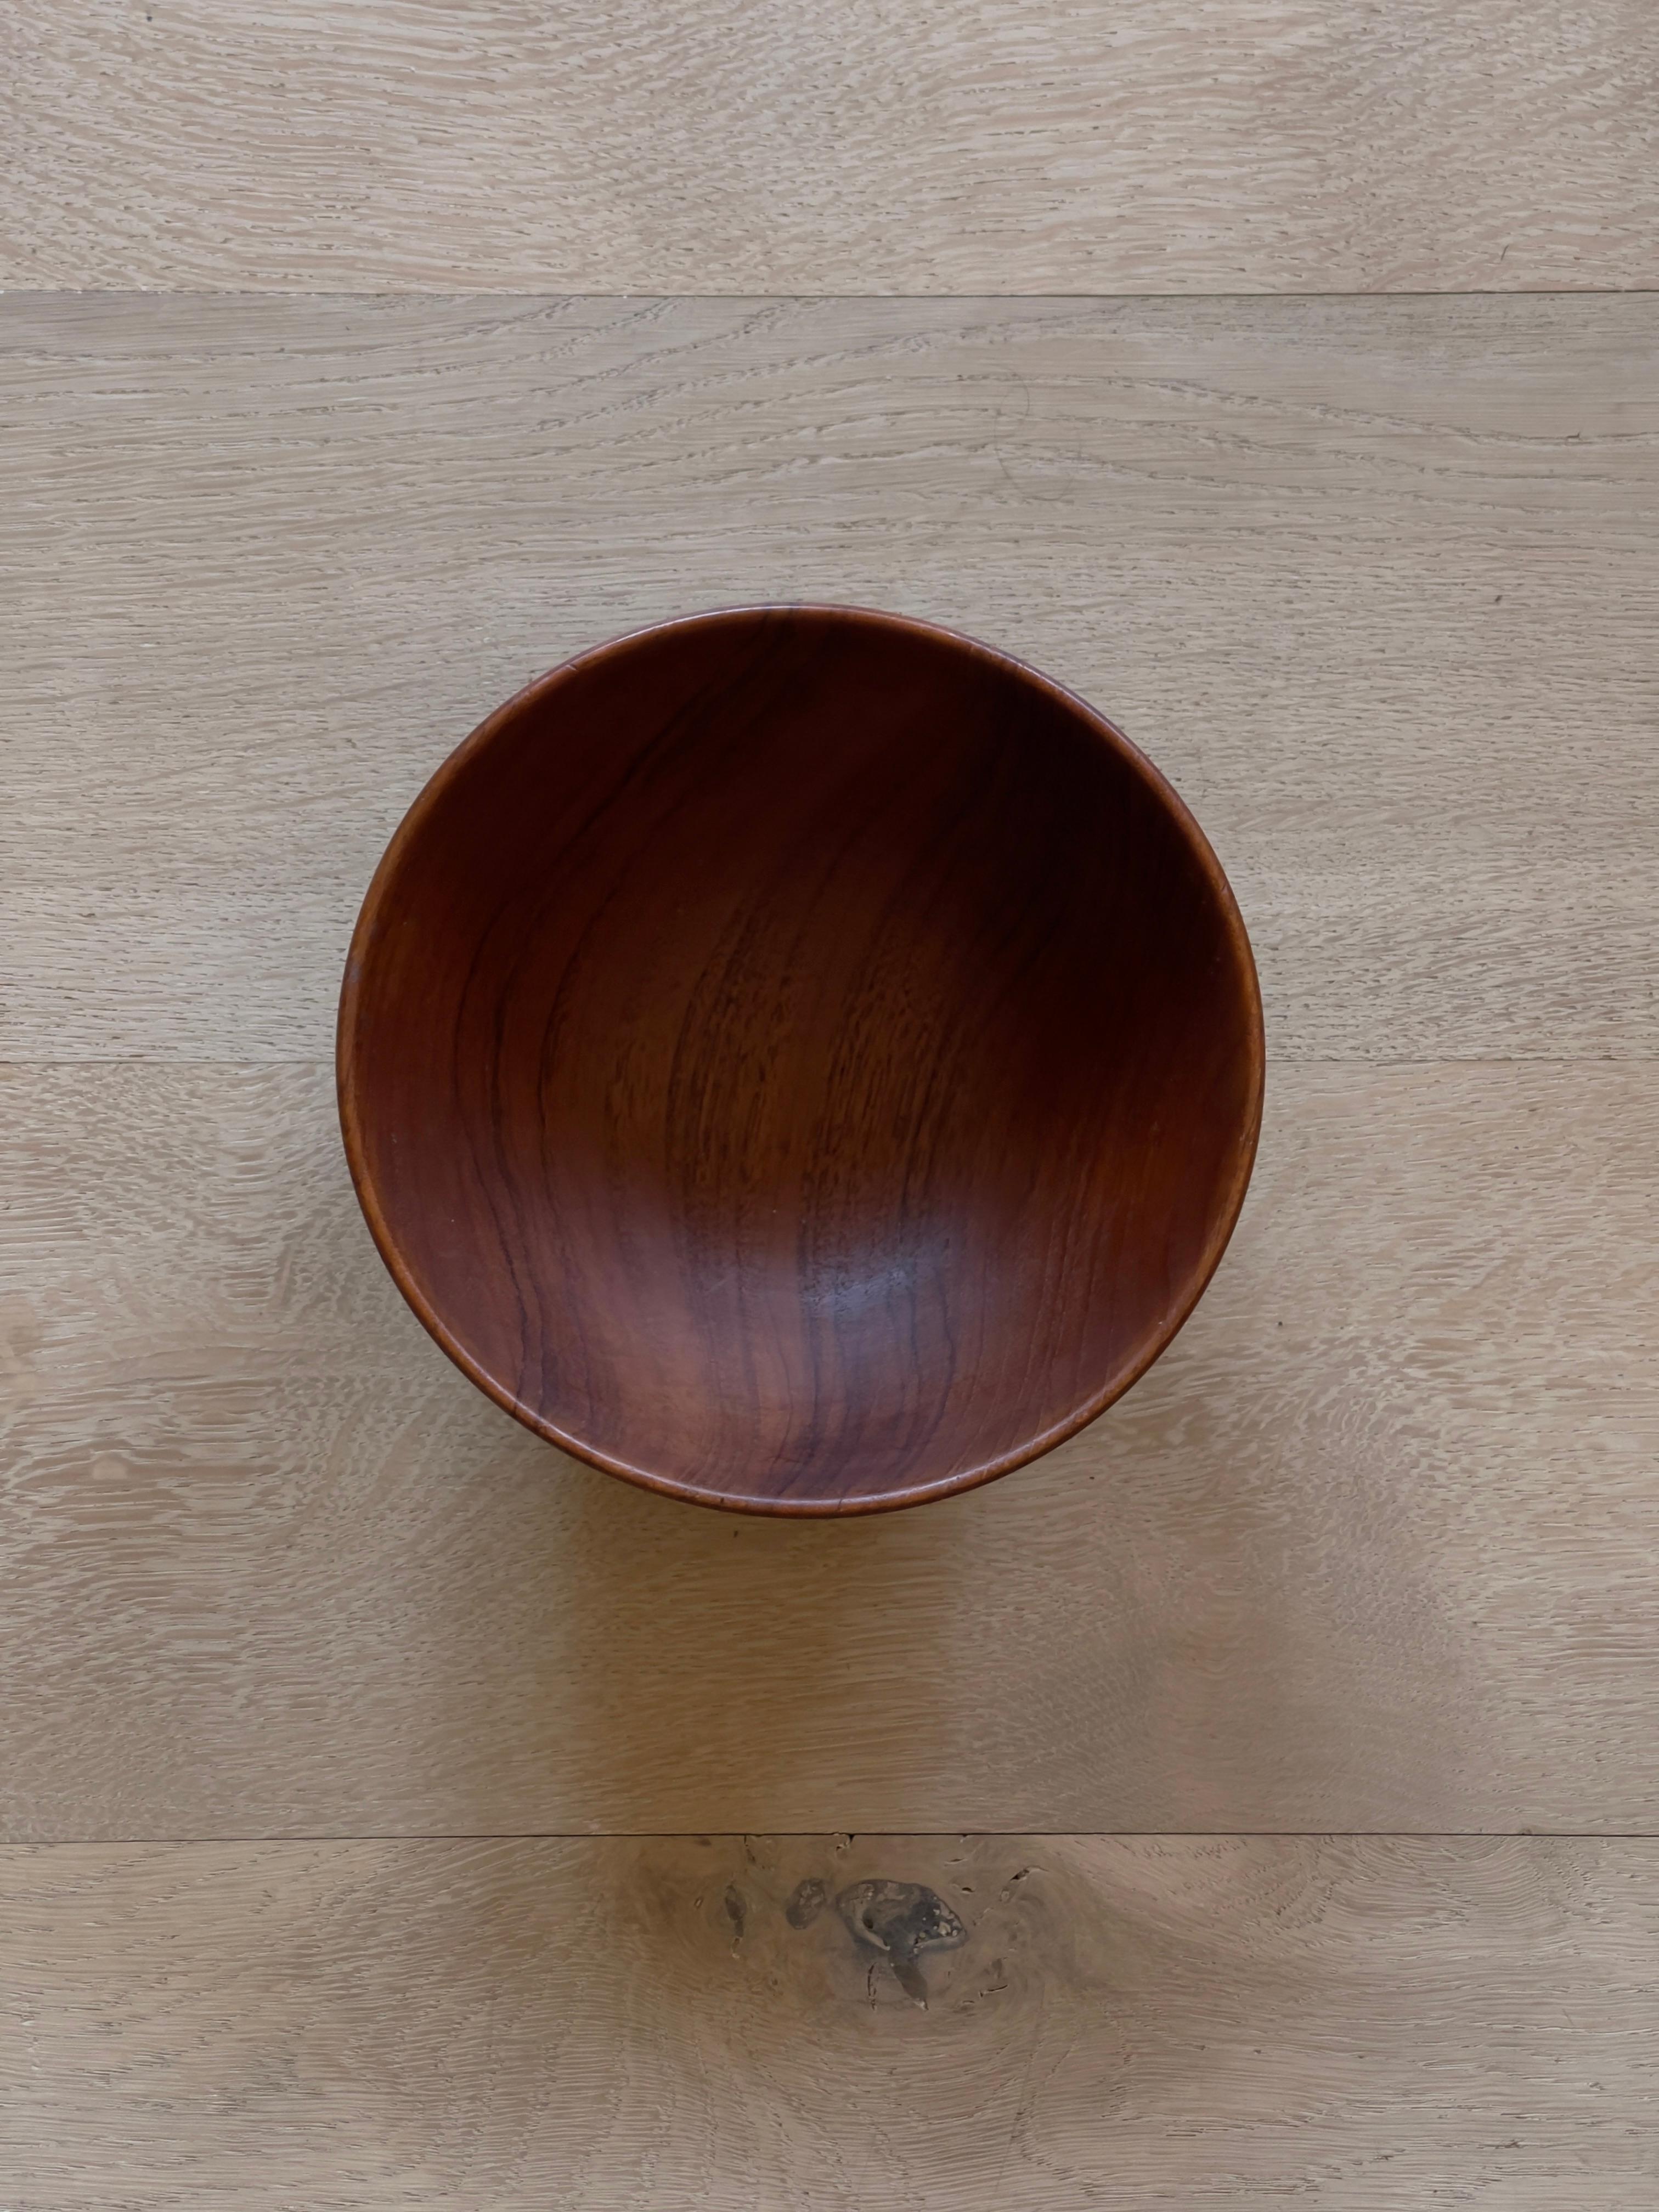 1960s Danish modern vintage teak bowl in very good condition. Beautiful woodwork and elegant shape. The bowl is signed 